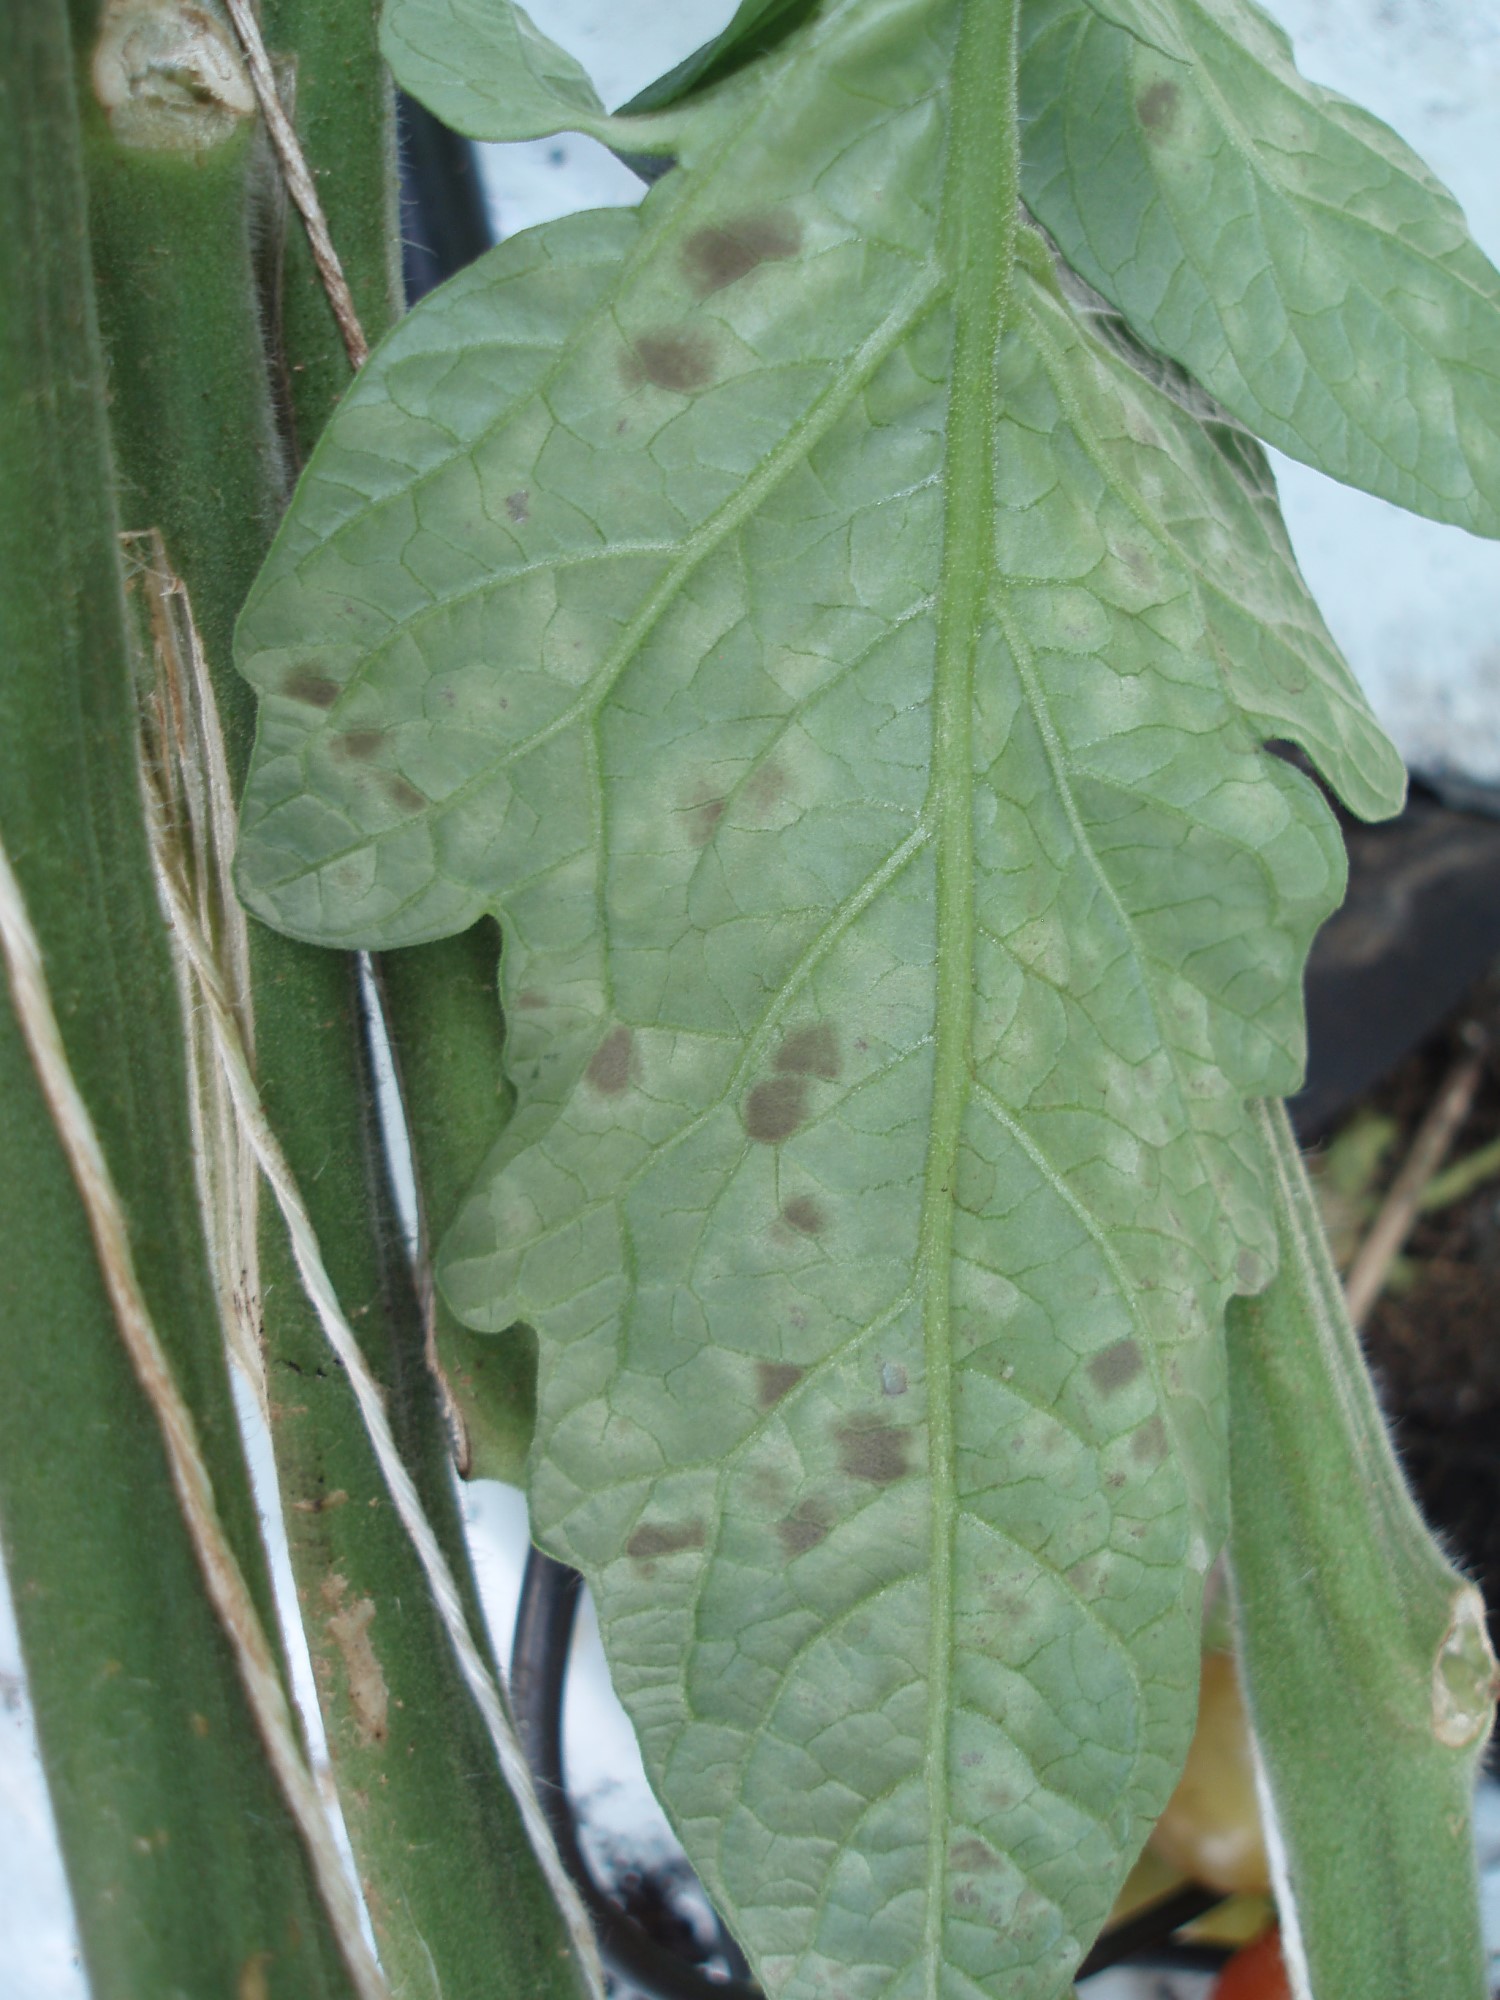 Velvety-brown fungal growth patches on the underside of a tomato leaf. Copyright Dave Kaye, RSK ADAS.